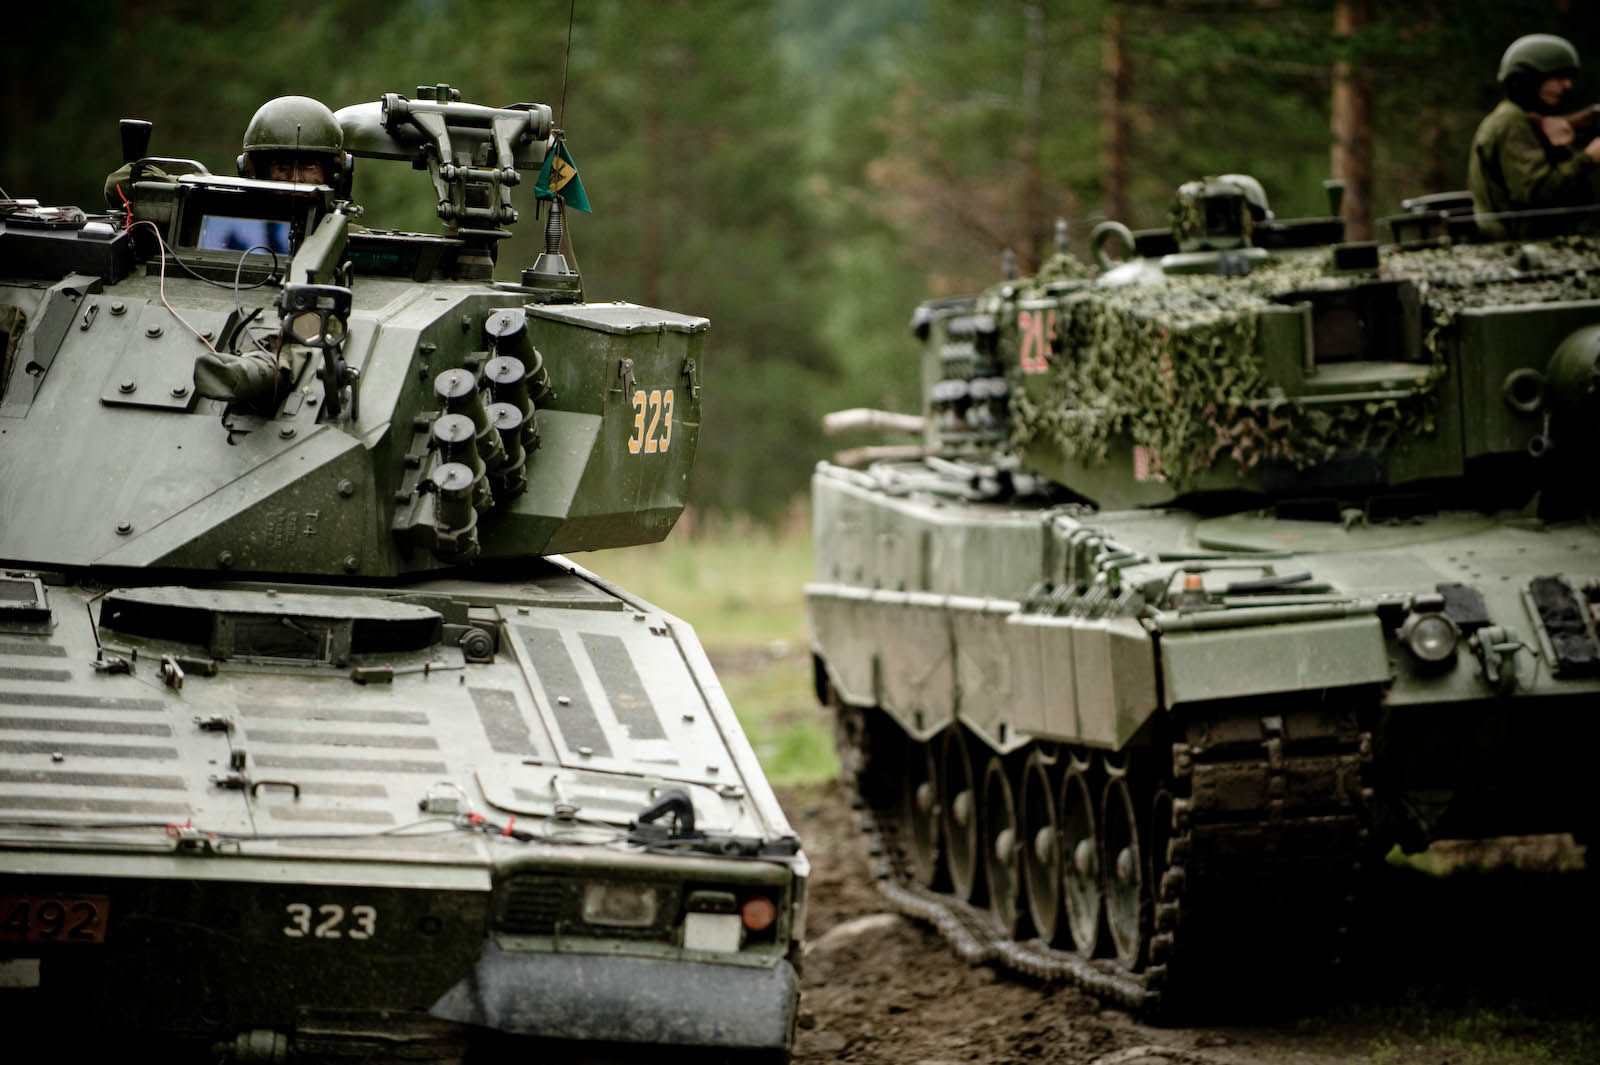 two military tanks parked in a wooded area